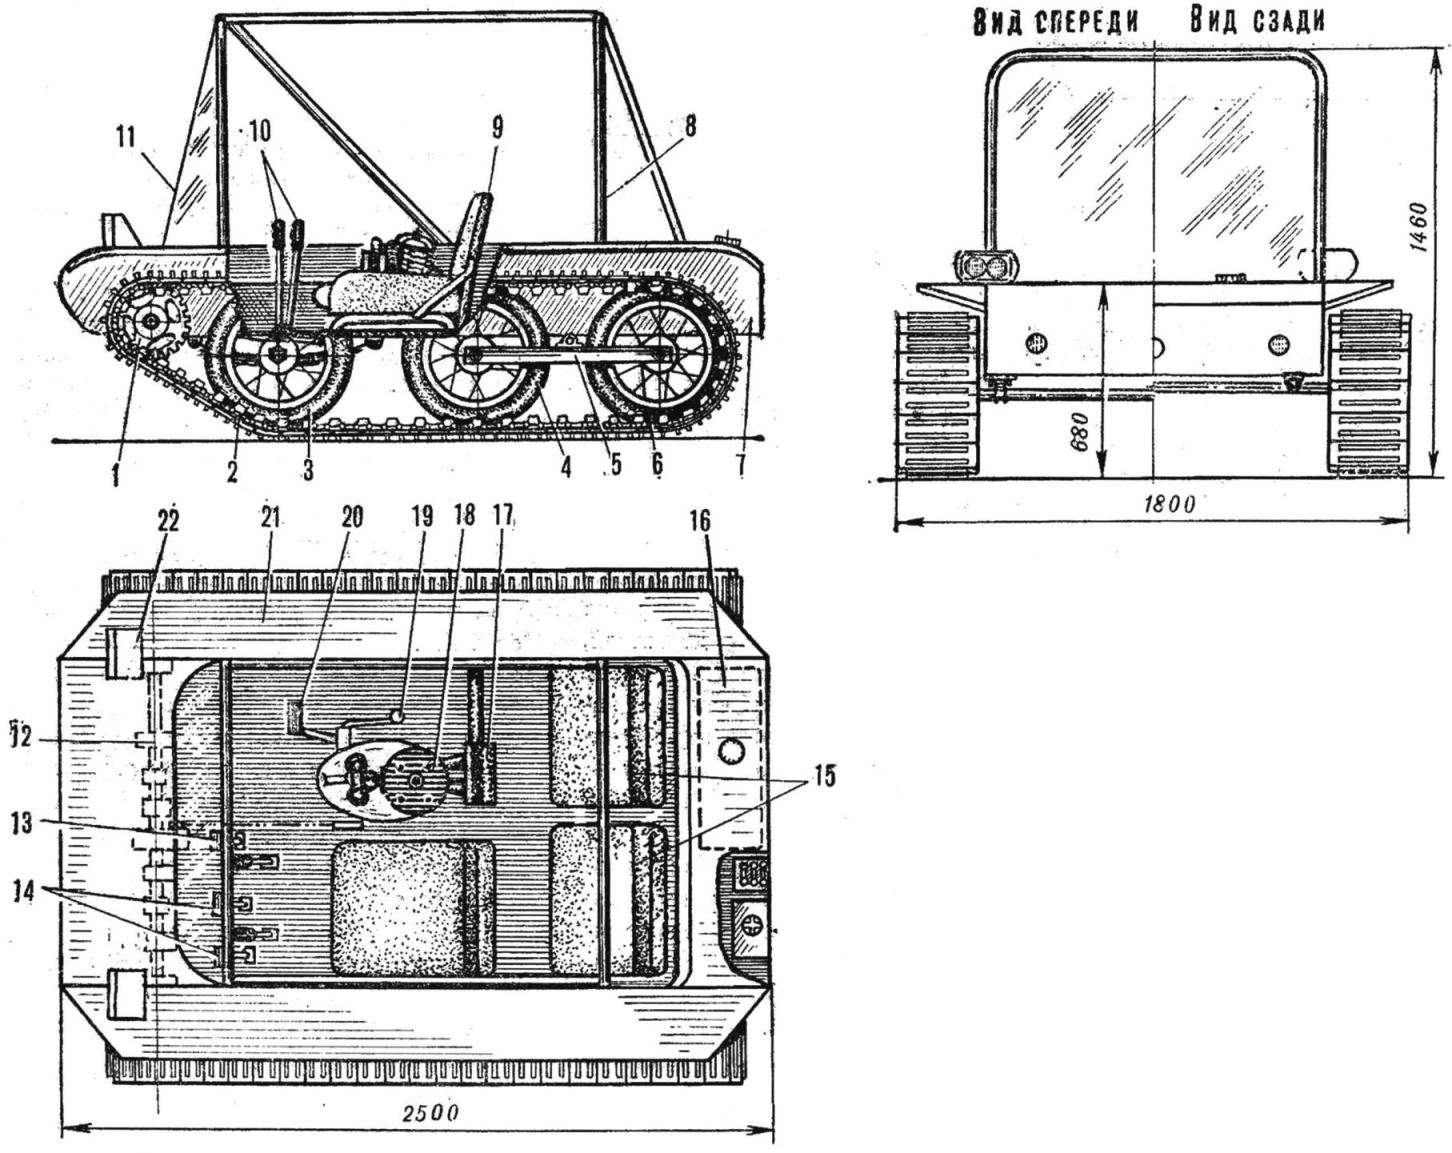 Fig. 1. The layout of the Rover 